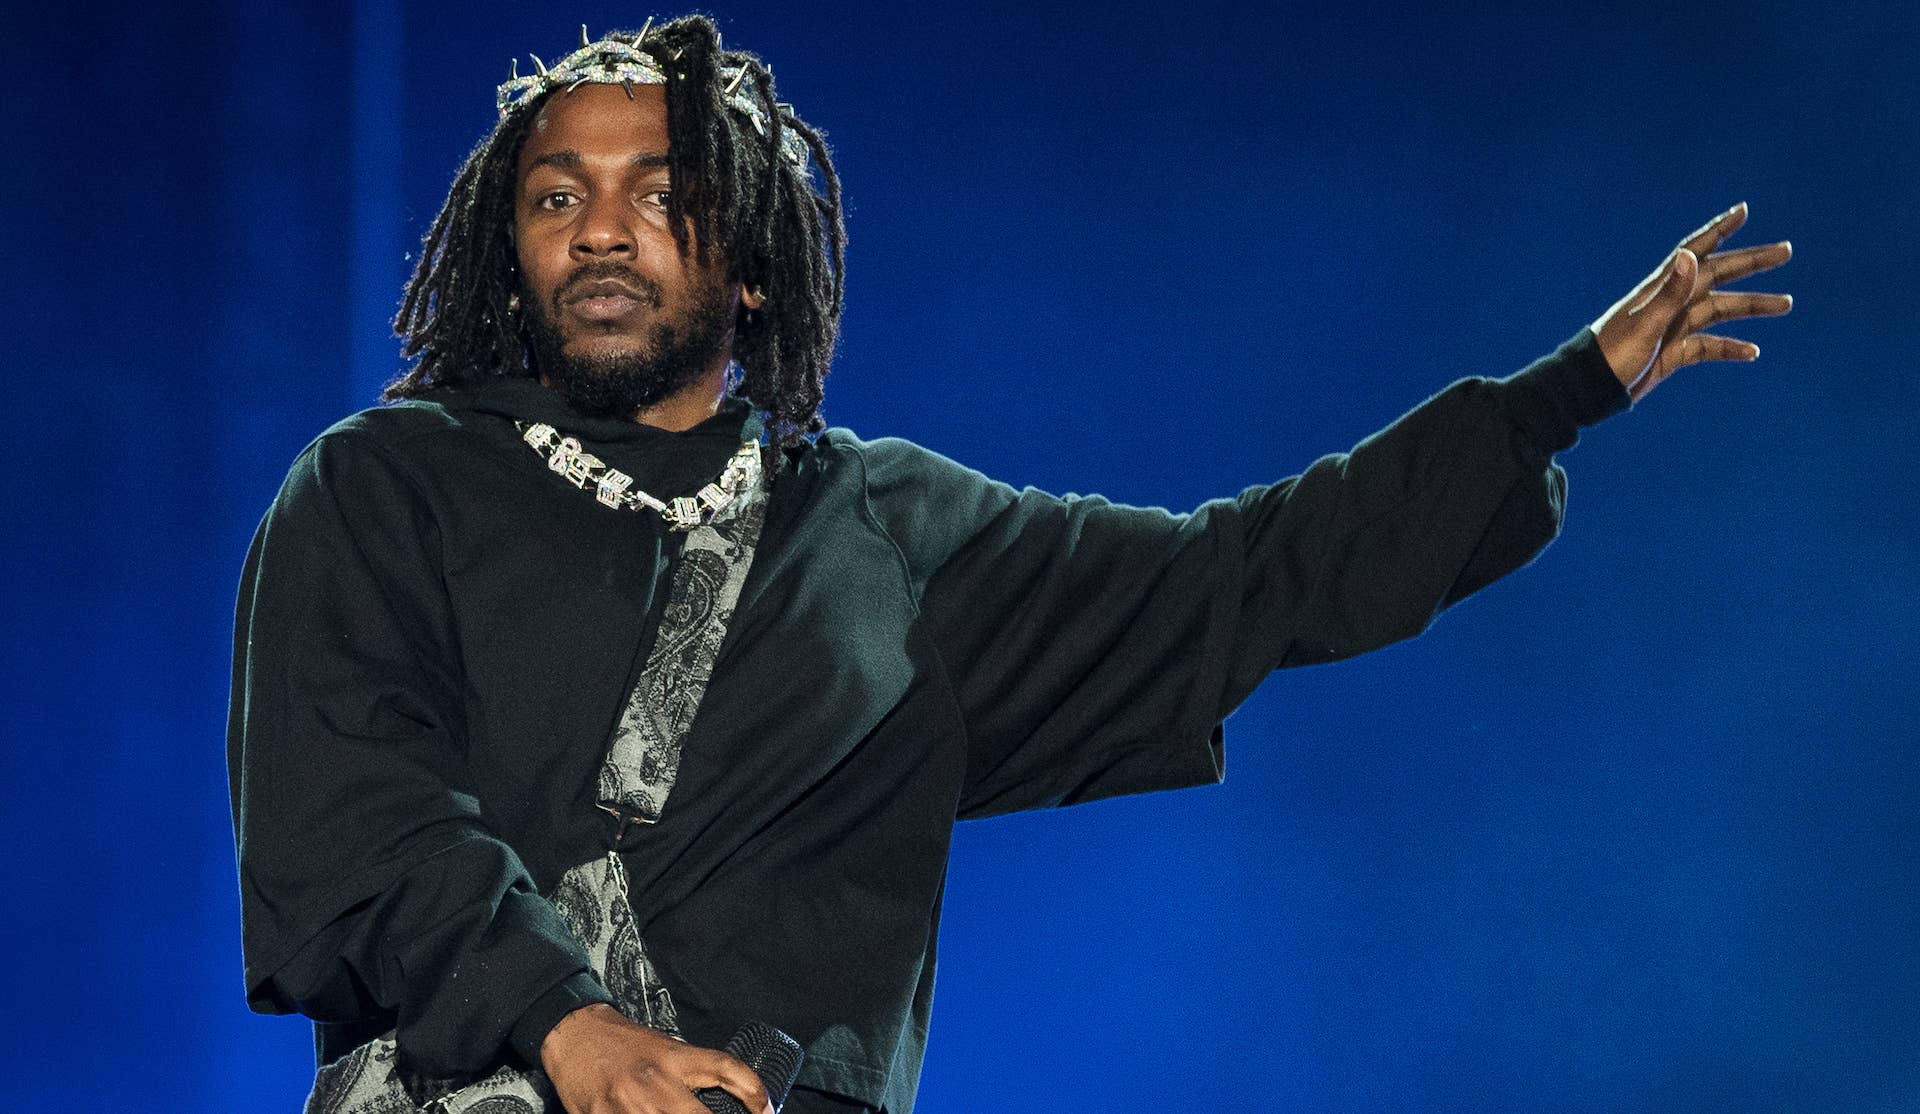 Kendrick Lamar performs onstage at The Big Steppers Tour